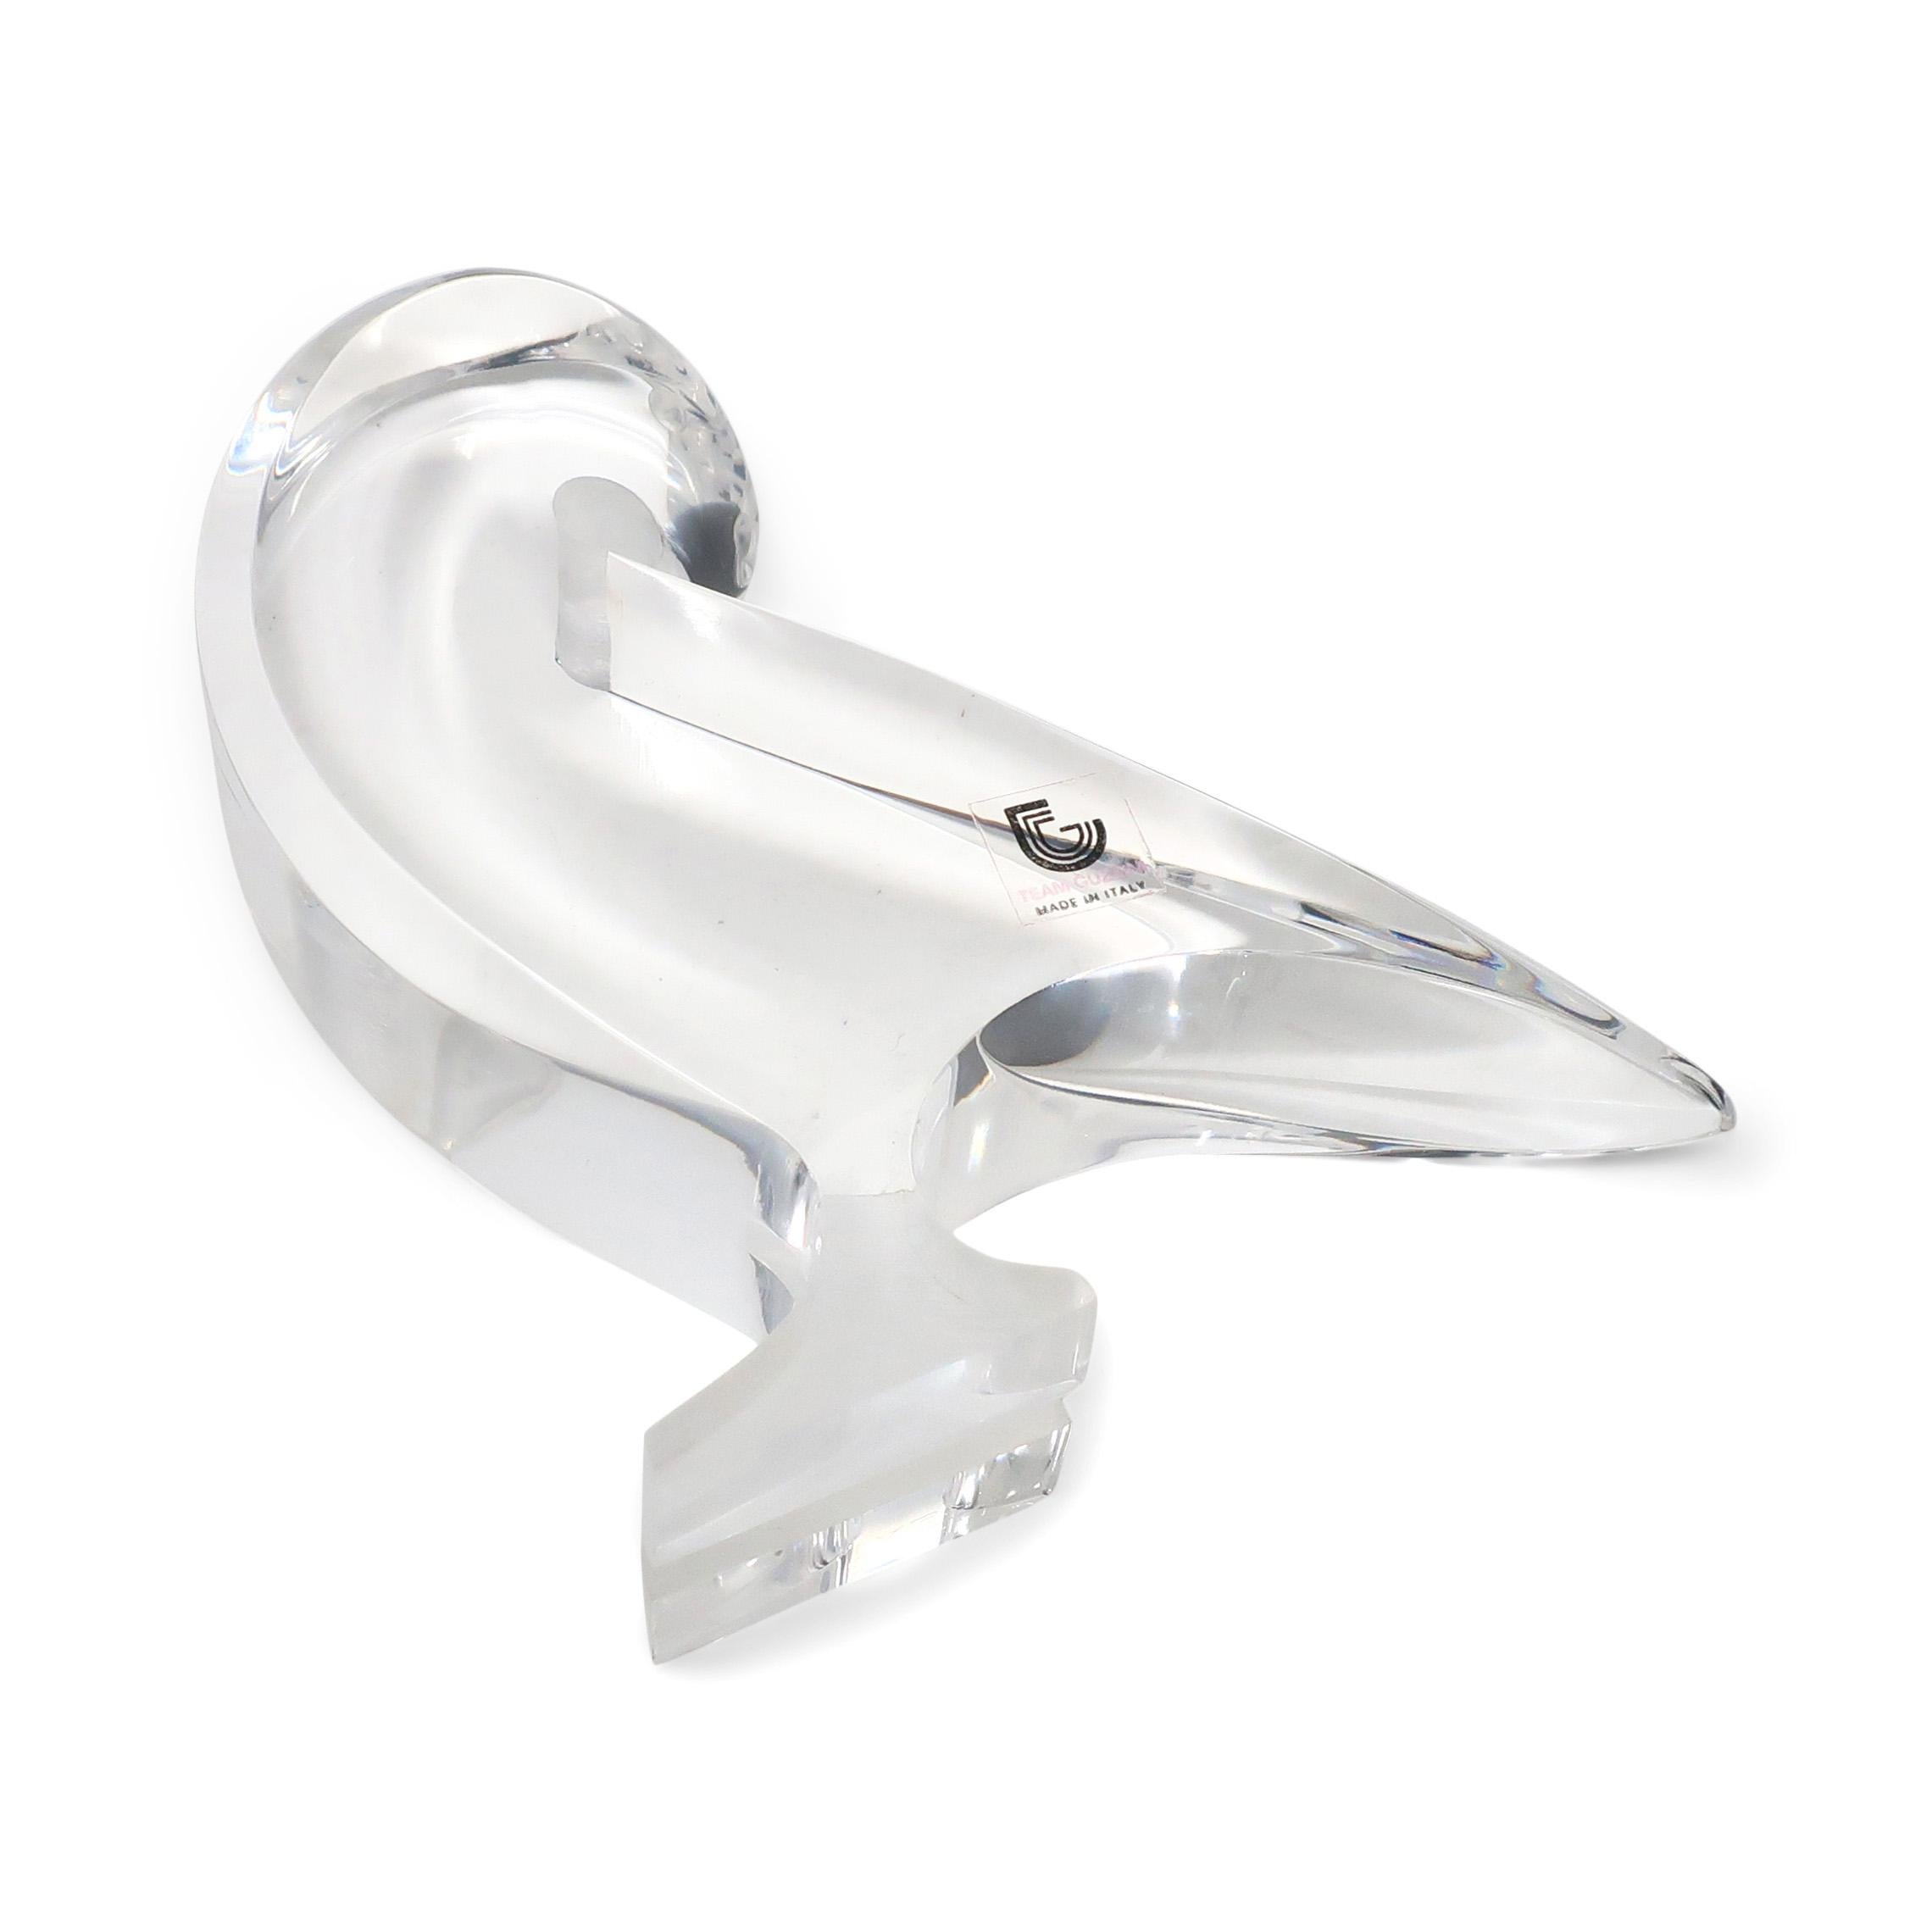 Vintage Lucite Bird Sculpture by Team Guzzini In Good Condition For Sale In Brooklyn, NY